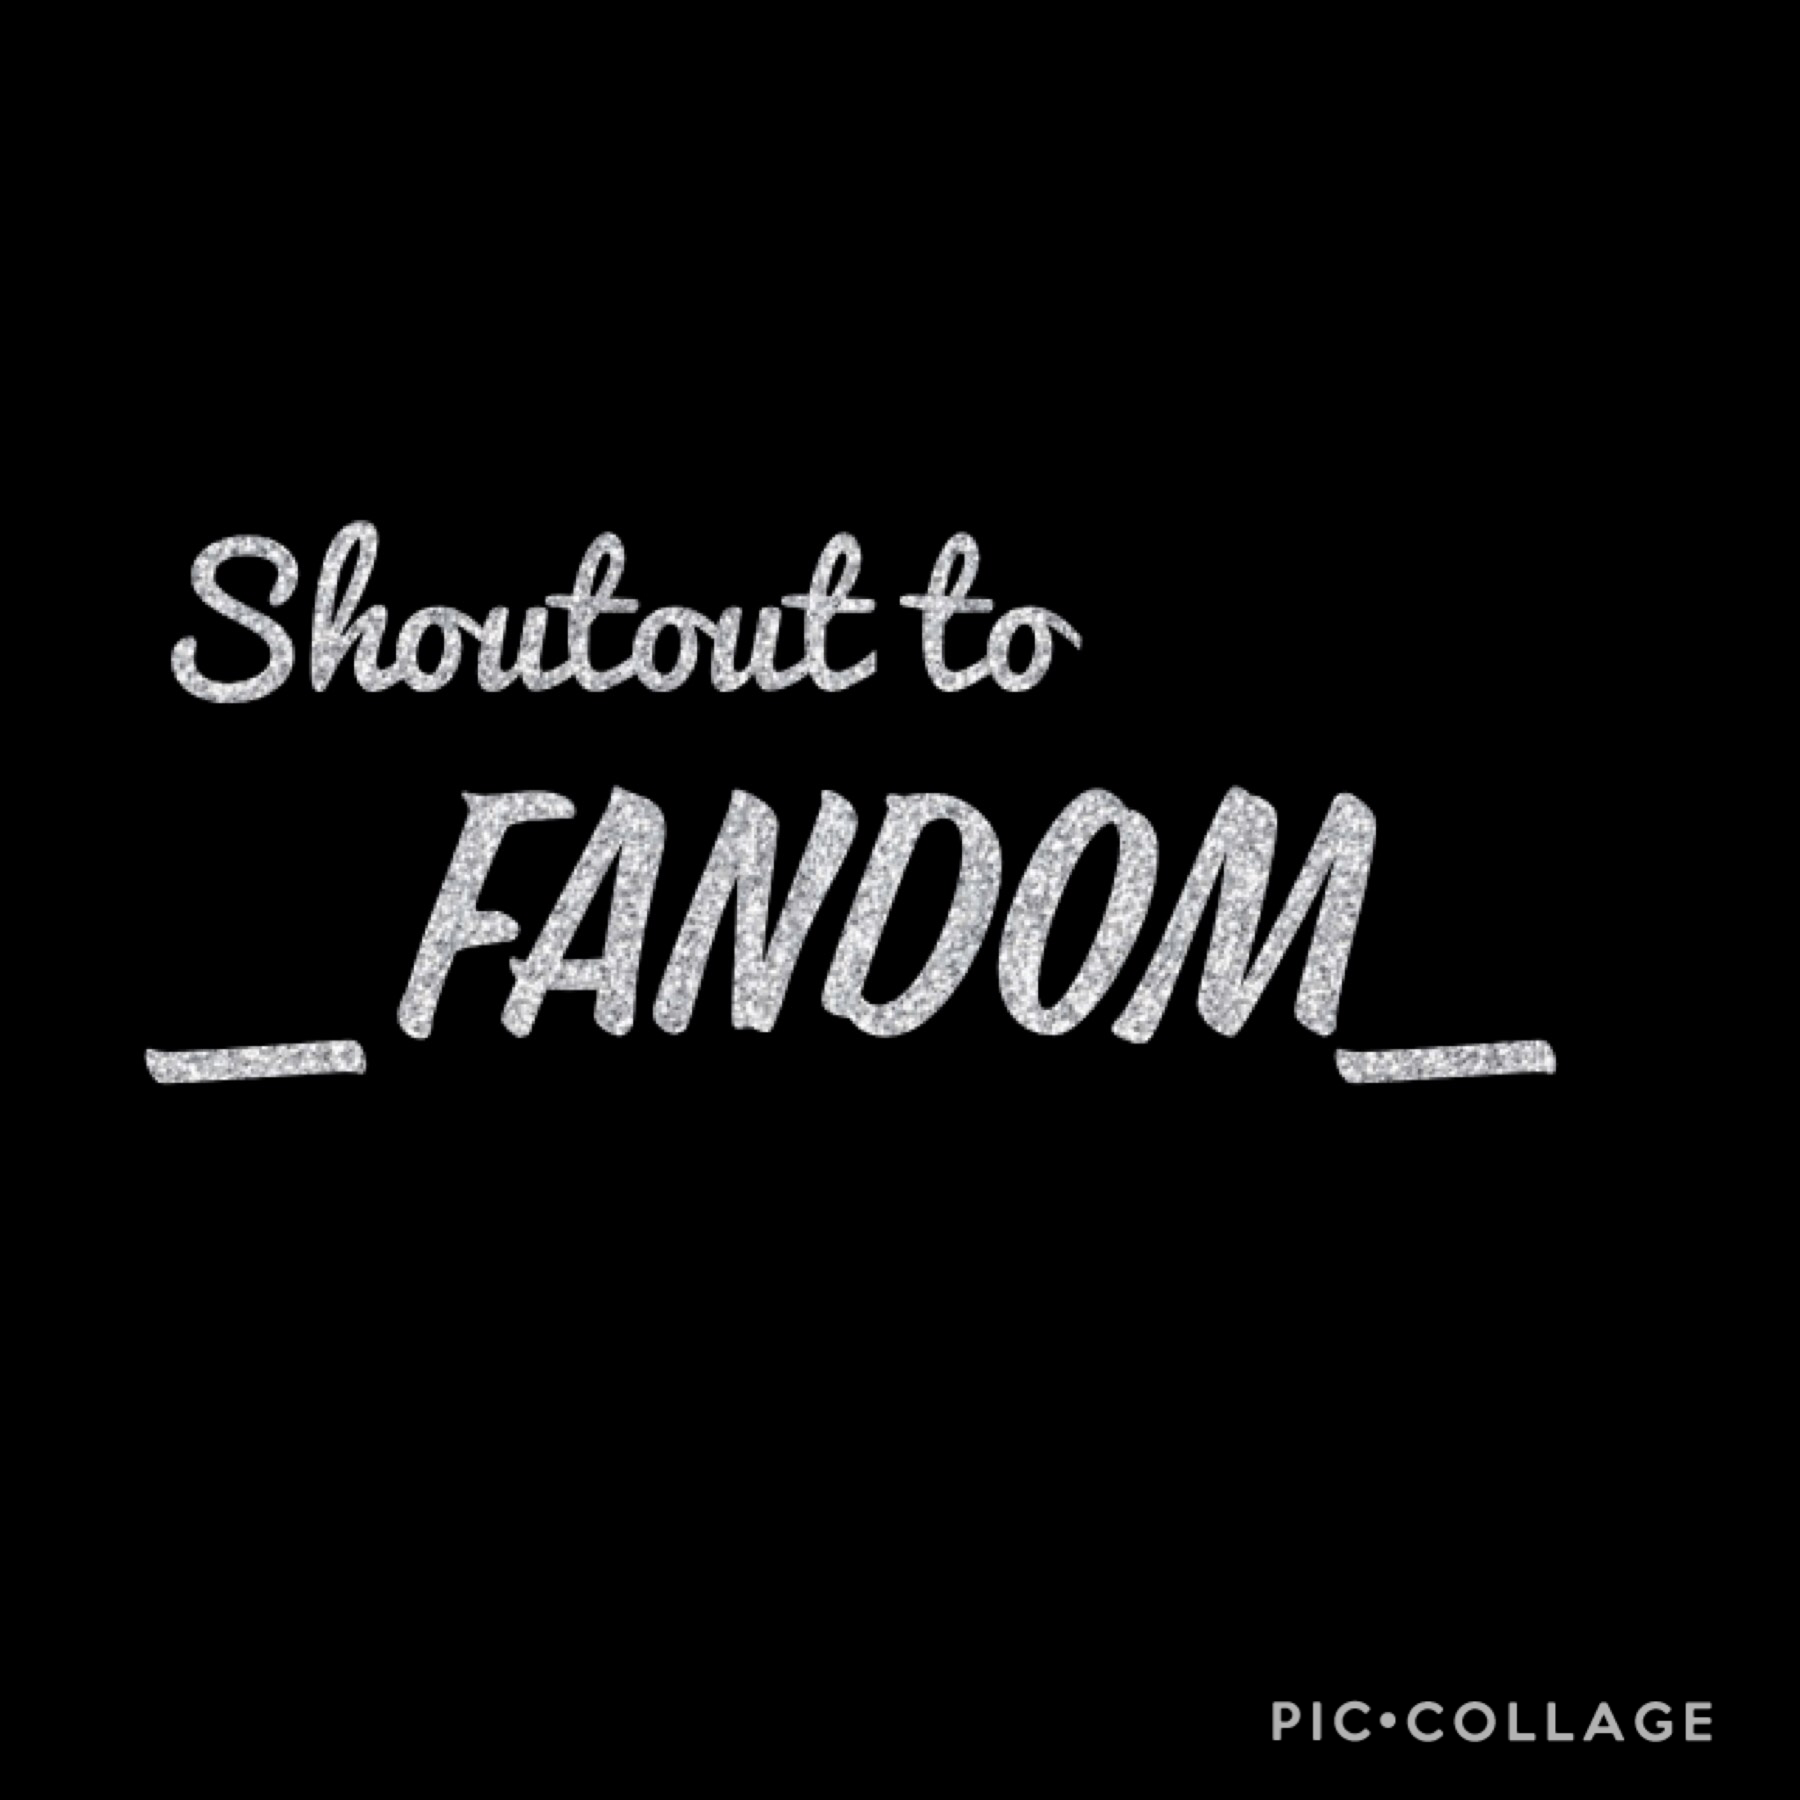 Shoutout to _Fandom_ and congrats on winning the movie contest!